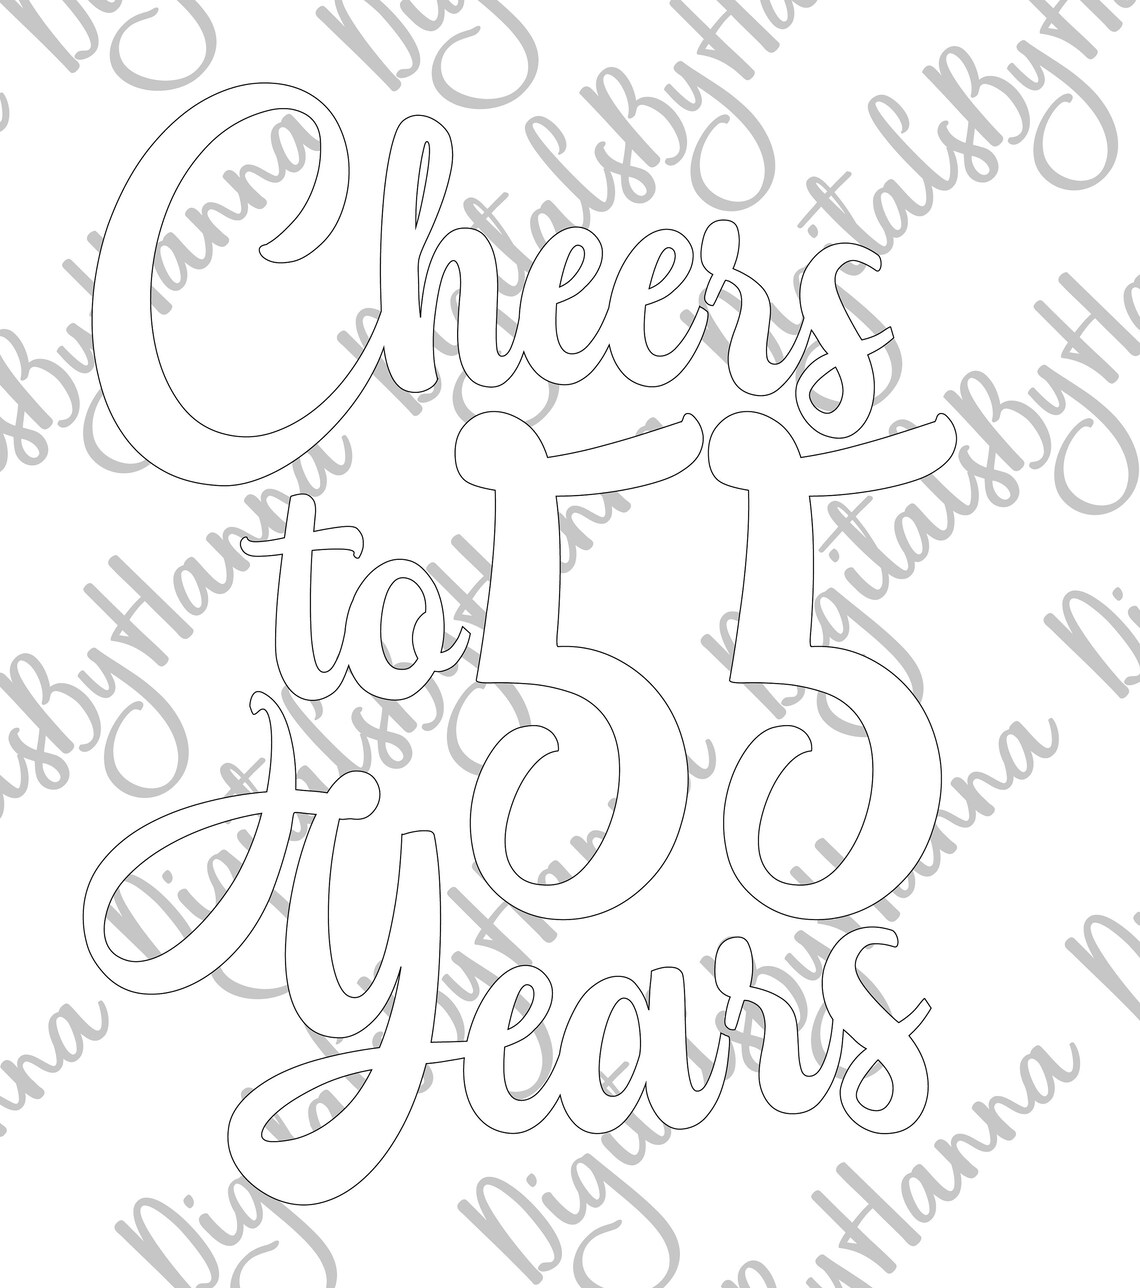 55th Birthday SVG Files for Cricut Saying Cheers to 55 Years | Etsy